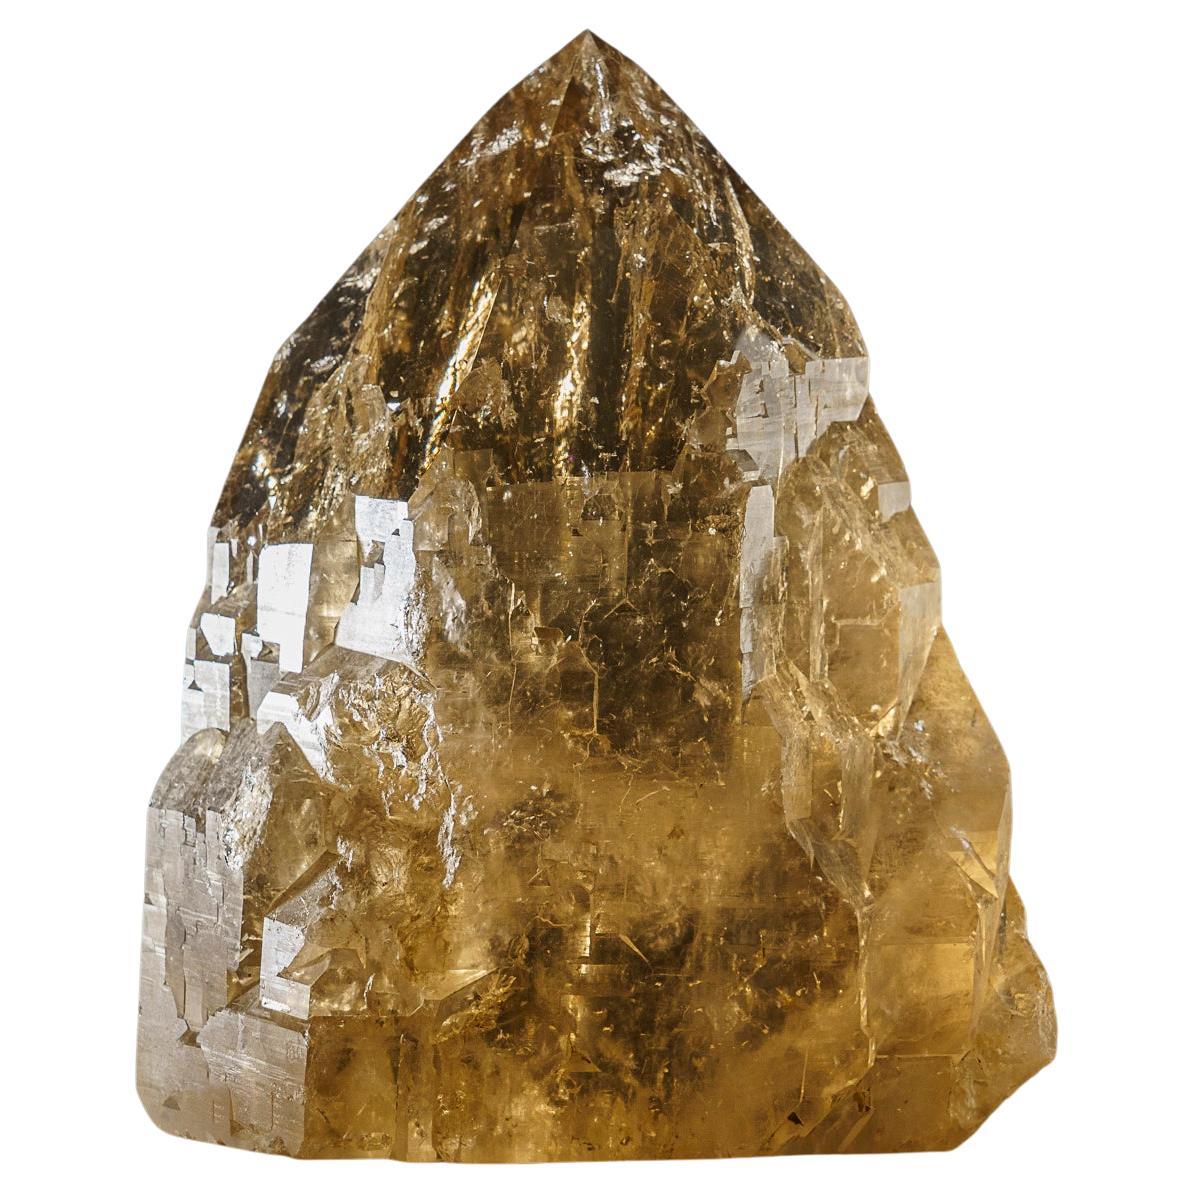 Genuine Large Cathedral Smoky Quartz Crystal Point From Brazil (29 lbs)